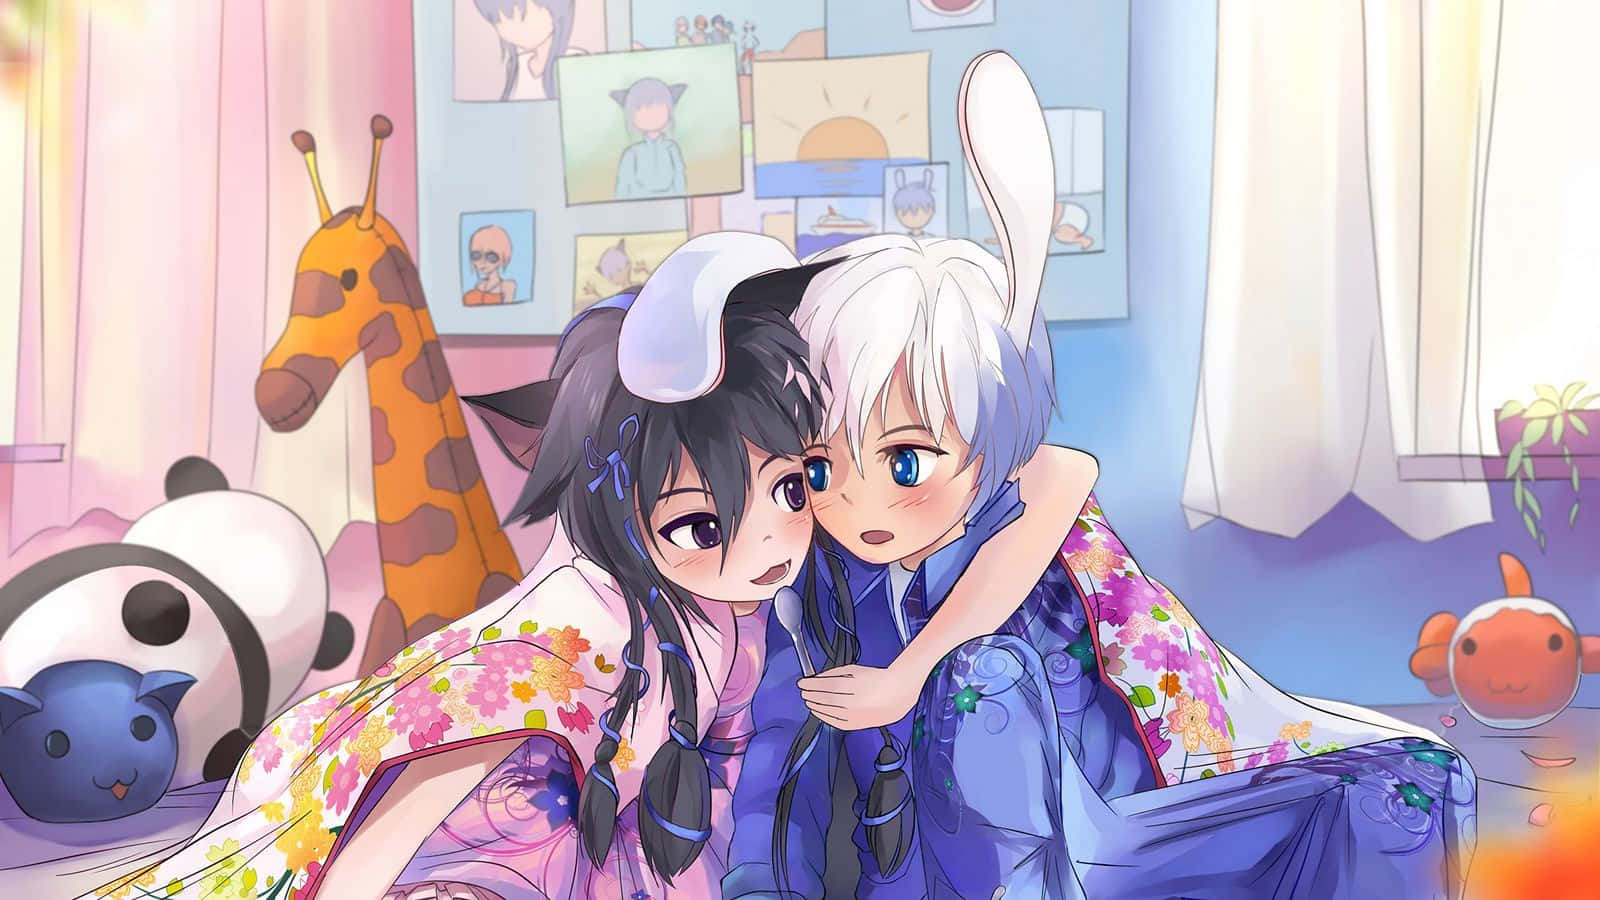 Two Anime Characters Hugging In A Room